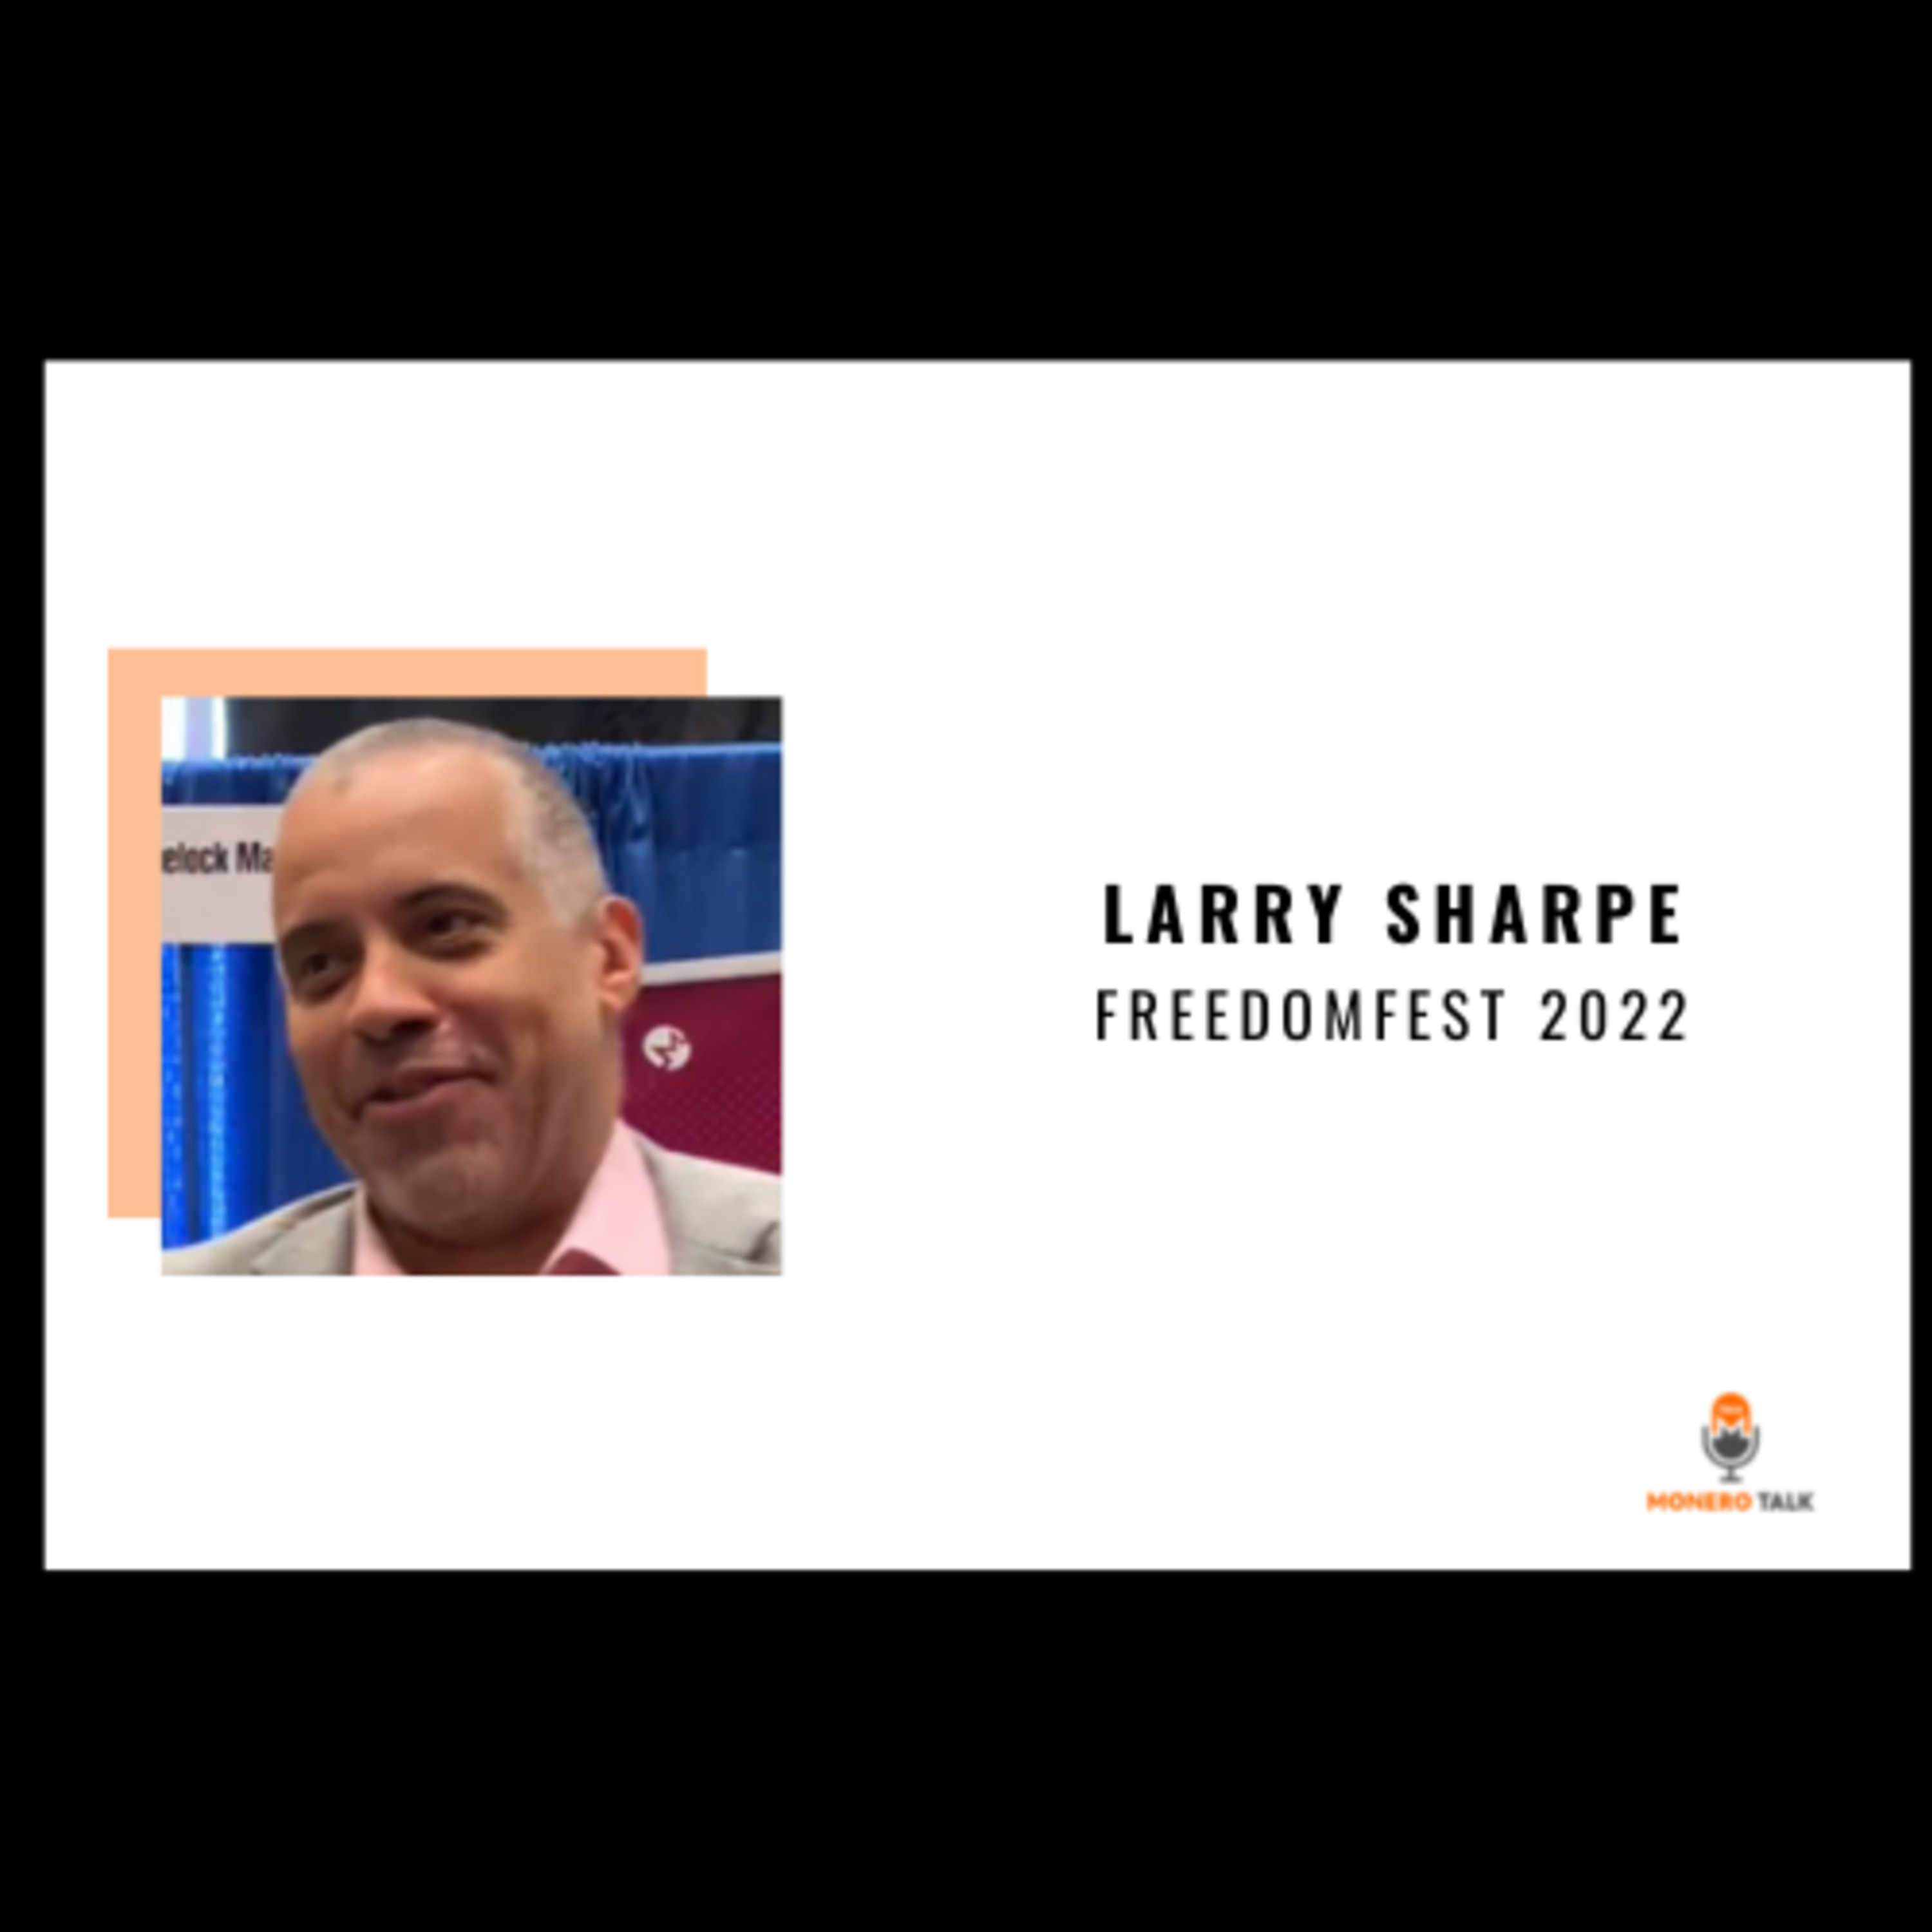 FreedomFest 2022: Larry Sharpe, Candidate for NY Governor